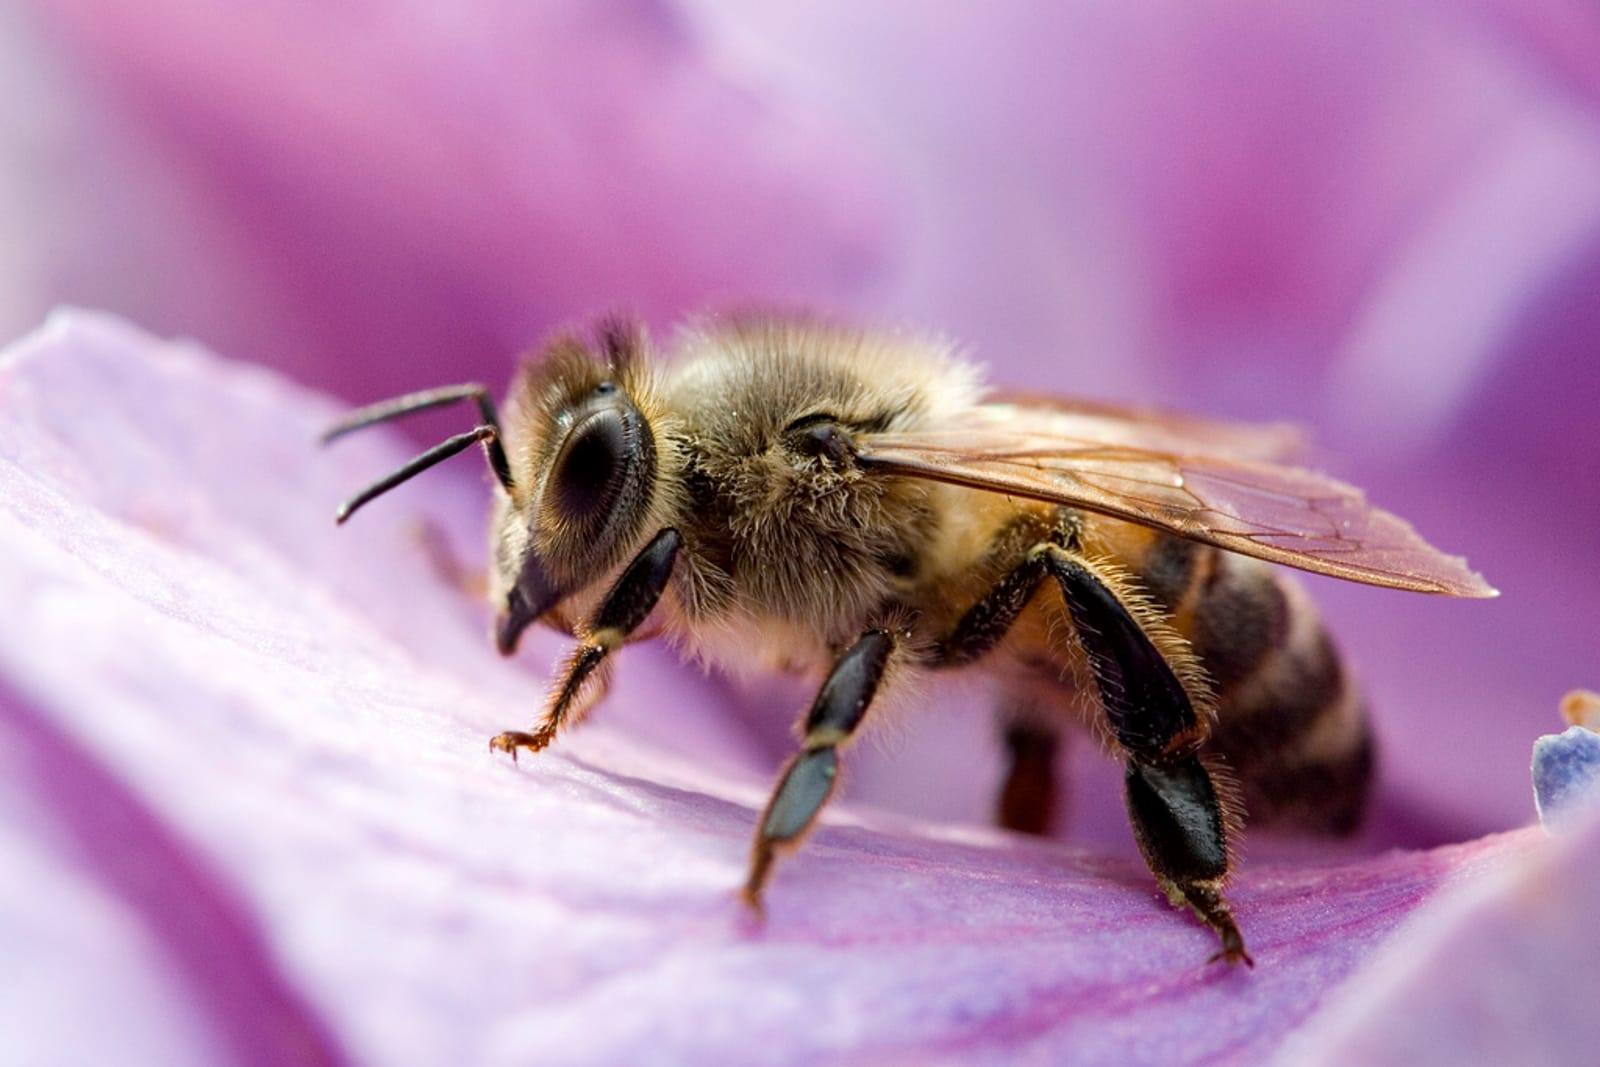 The 3 main reasons why bees are disappearing